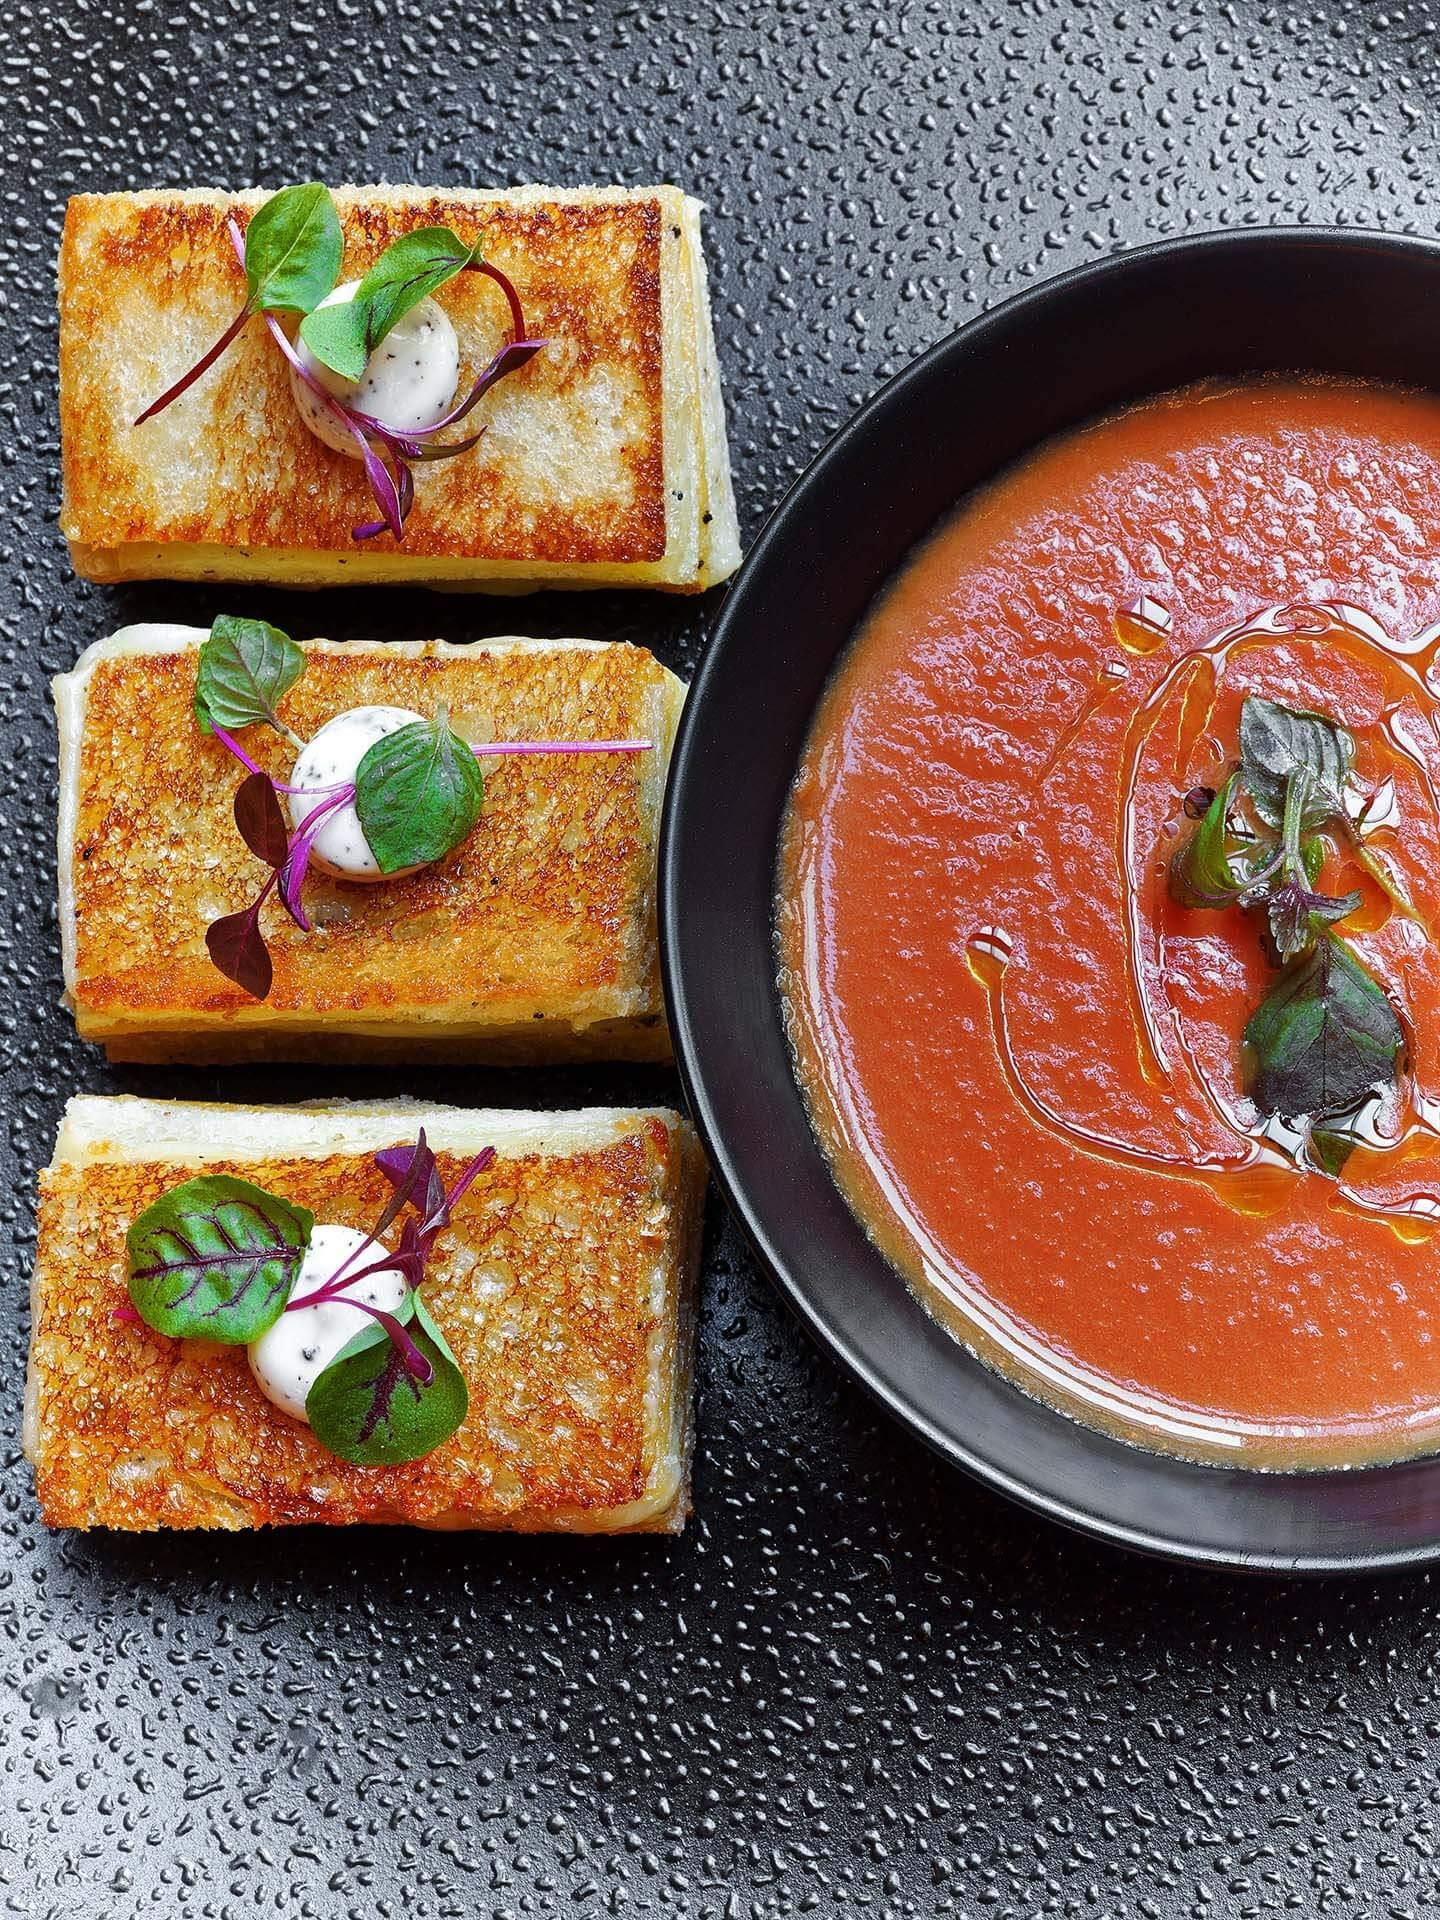 Baccarat grilled cheese and tomato soup